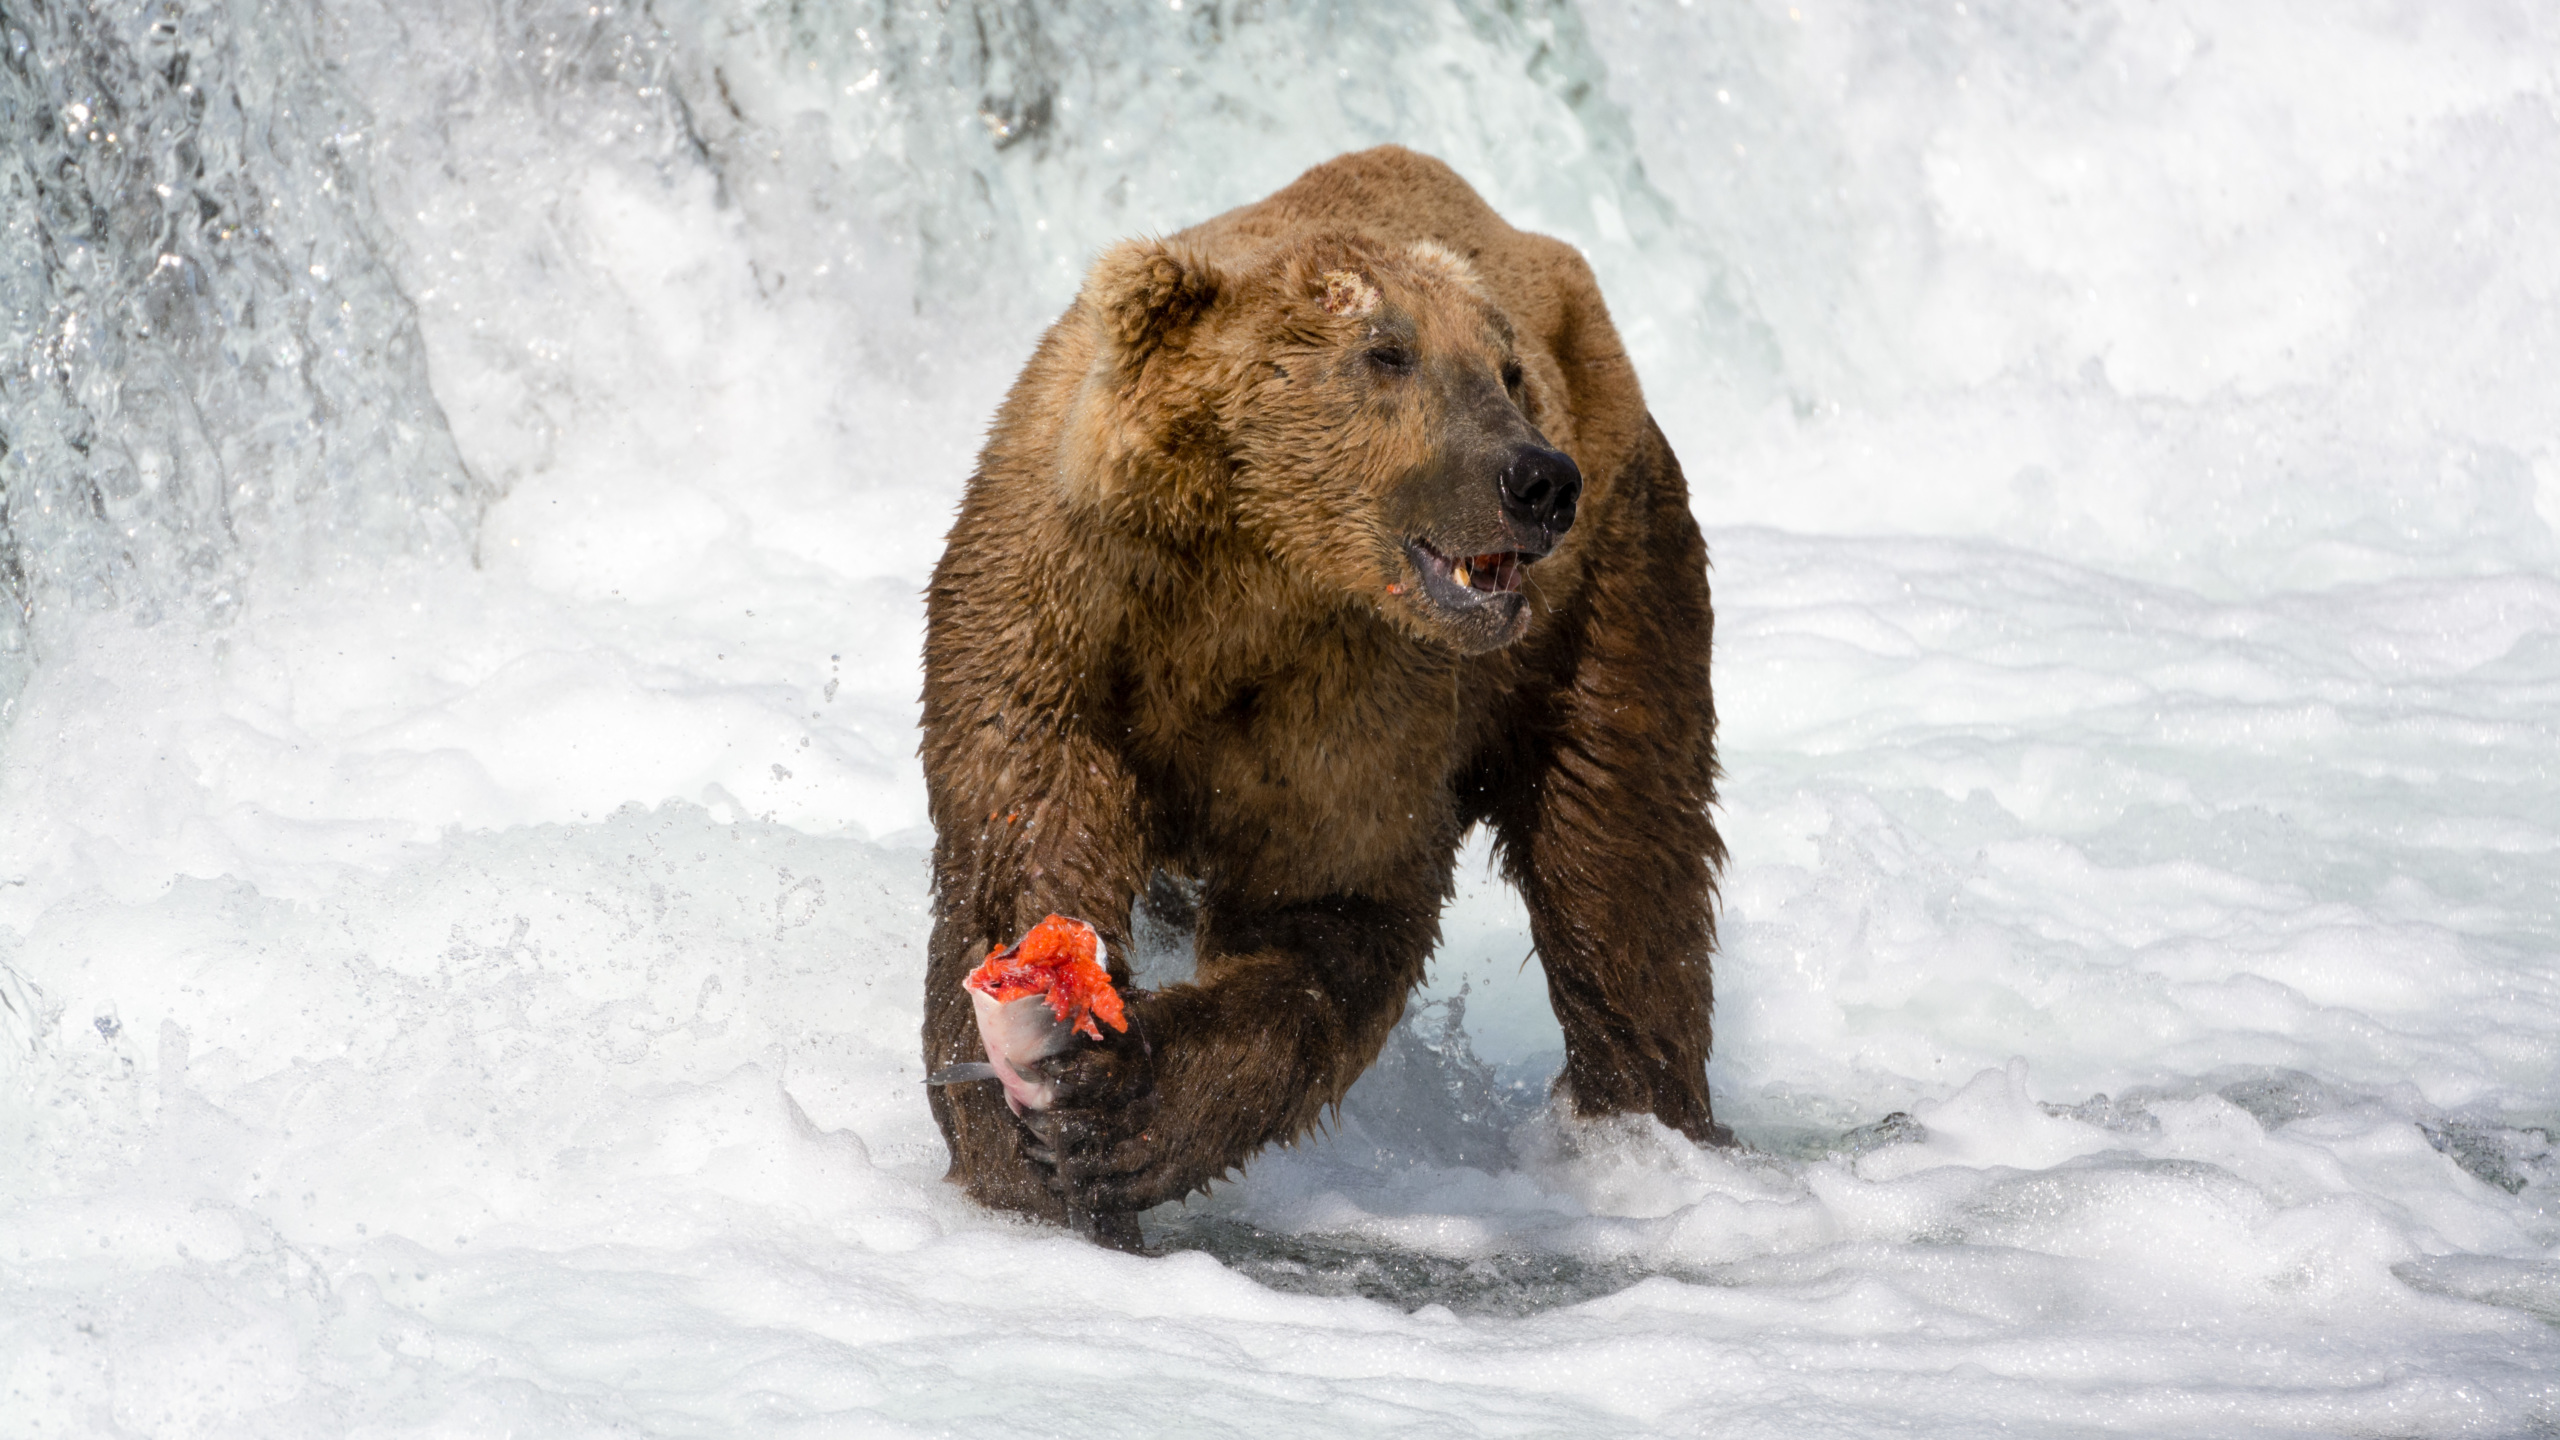 Brown bear eating a salmon while standing in river